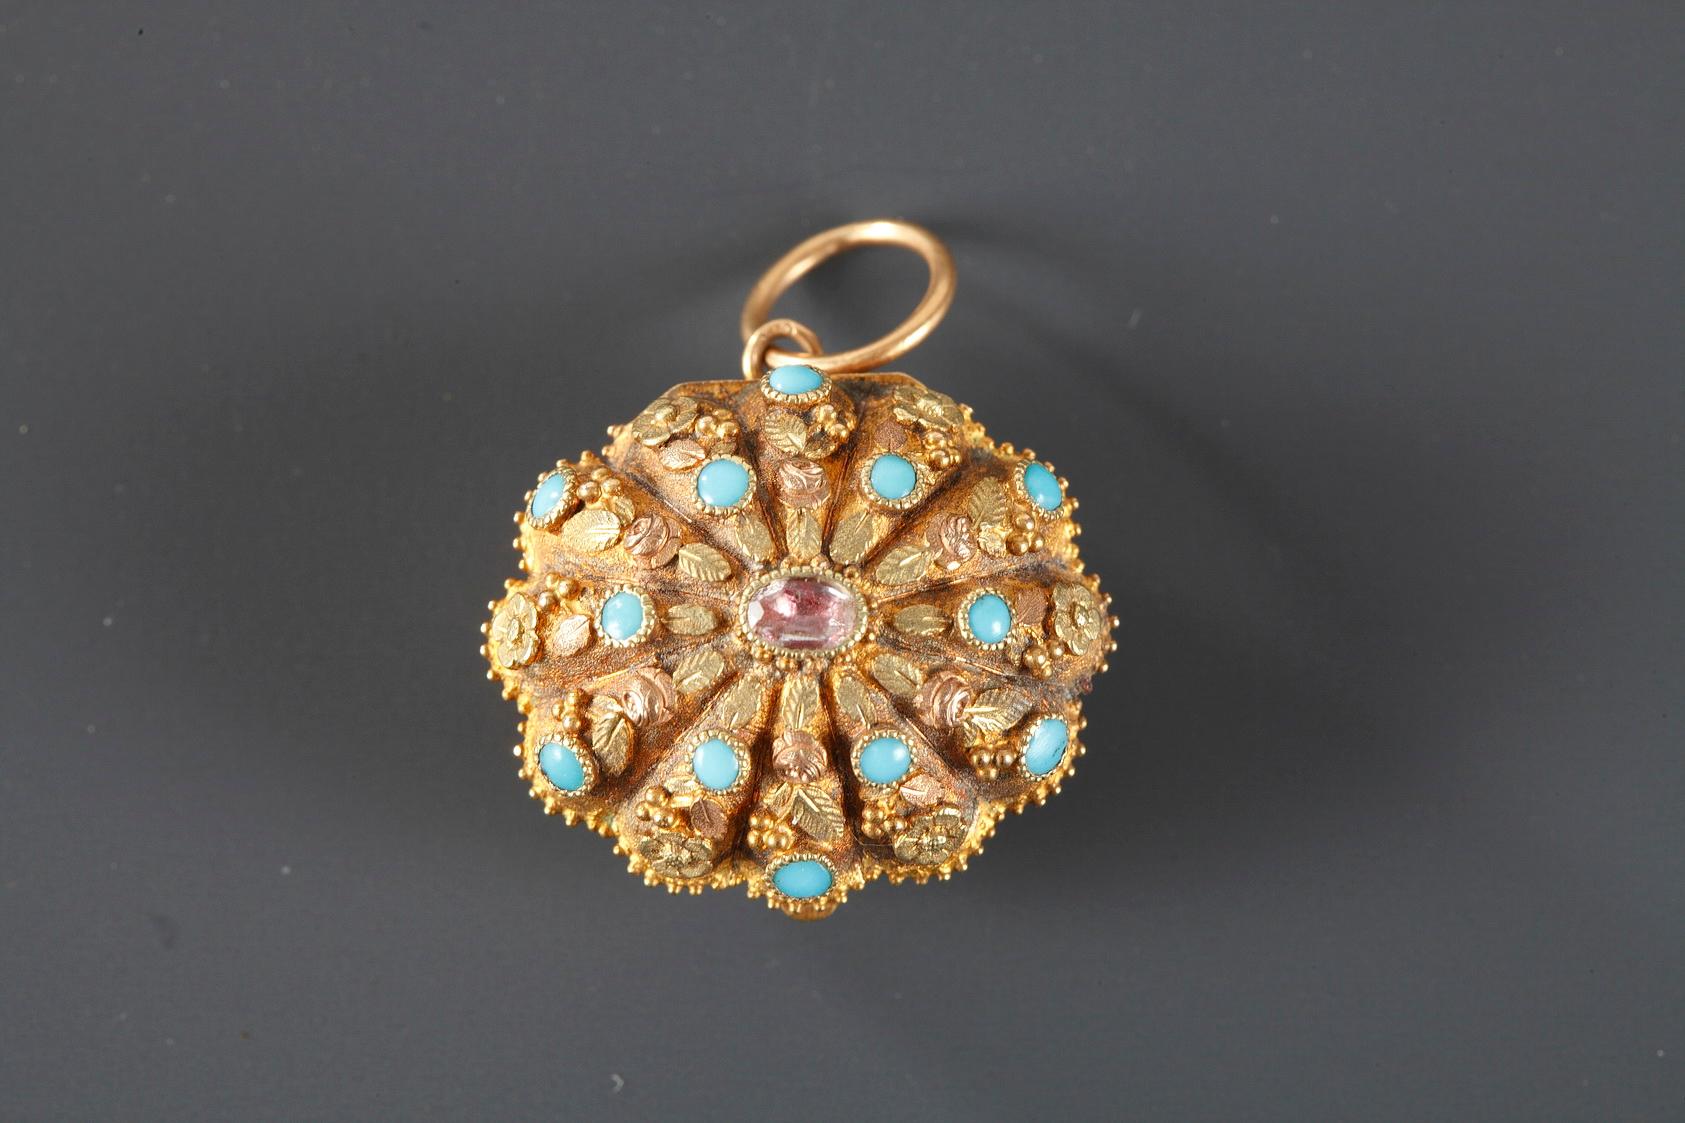 A shell-shaped vinaigrette finely chiselled with flowers and seeds in two colours of gold. The lid is decorated with a ruby cabochon surrounded by small beards of turquoise. Interior openwork railing for flavours, adorned with foliages.
French mark